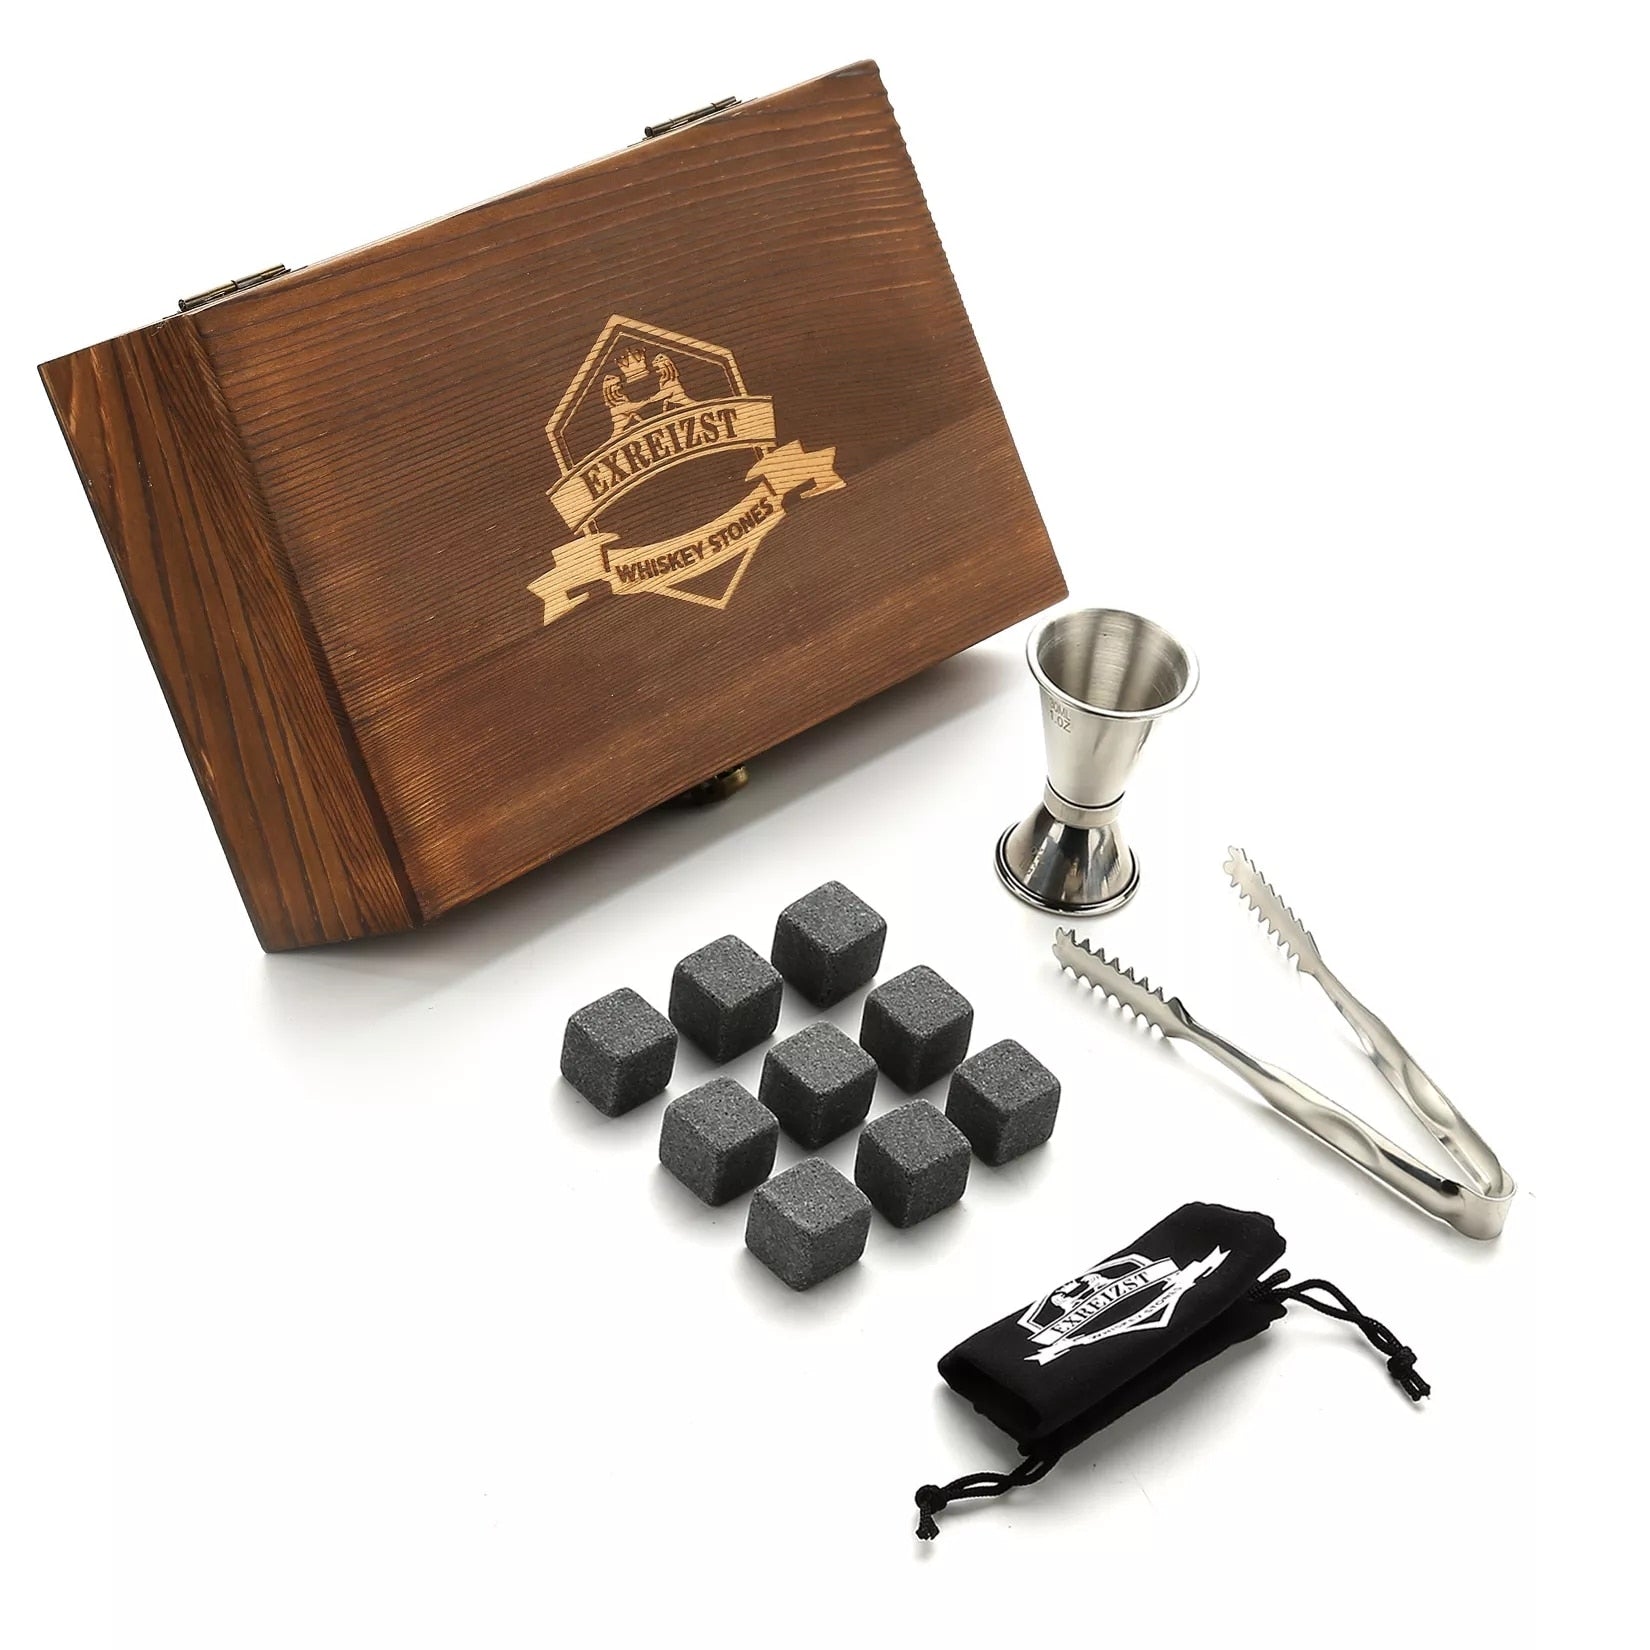 Whiskey Stones Gift Set - 9 Granite Chilling Stones Whisky Rocks - Reusable Ice Cubes With Tongs Stopper - Best Drinking Gift